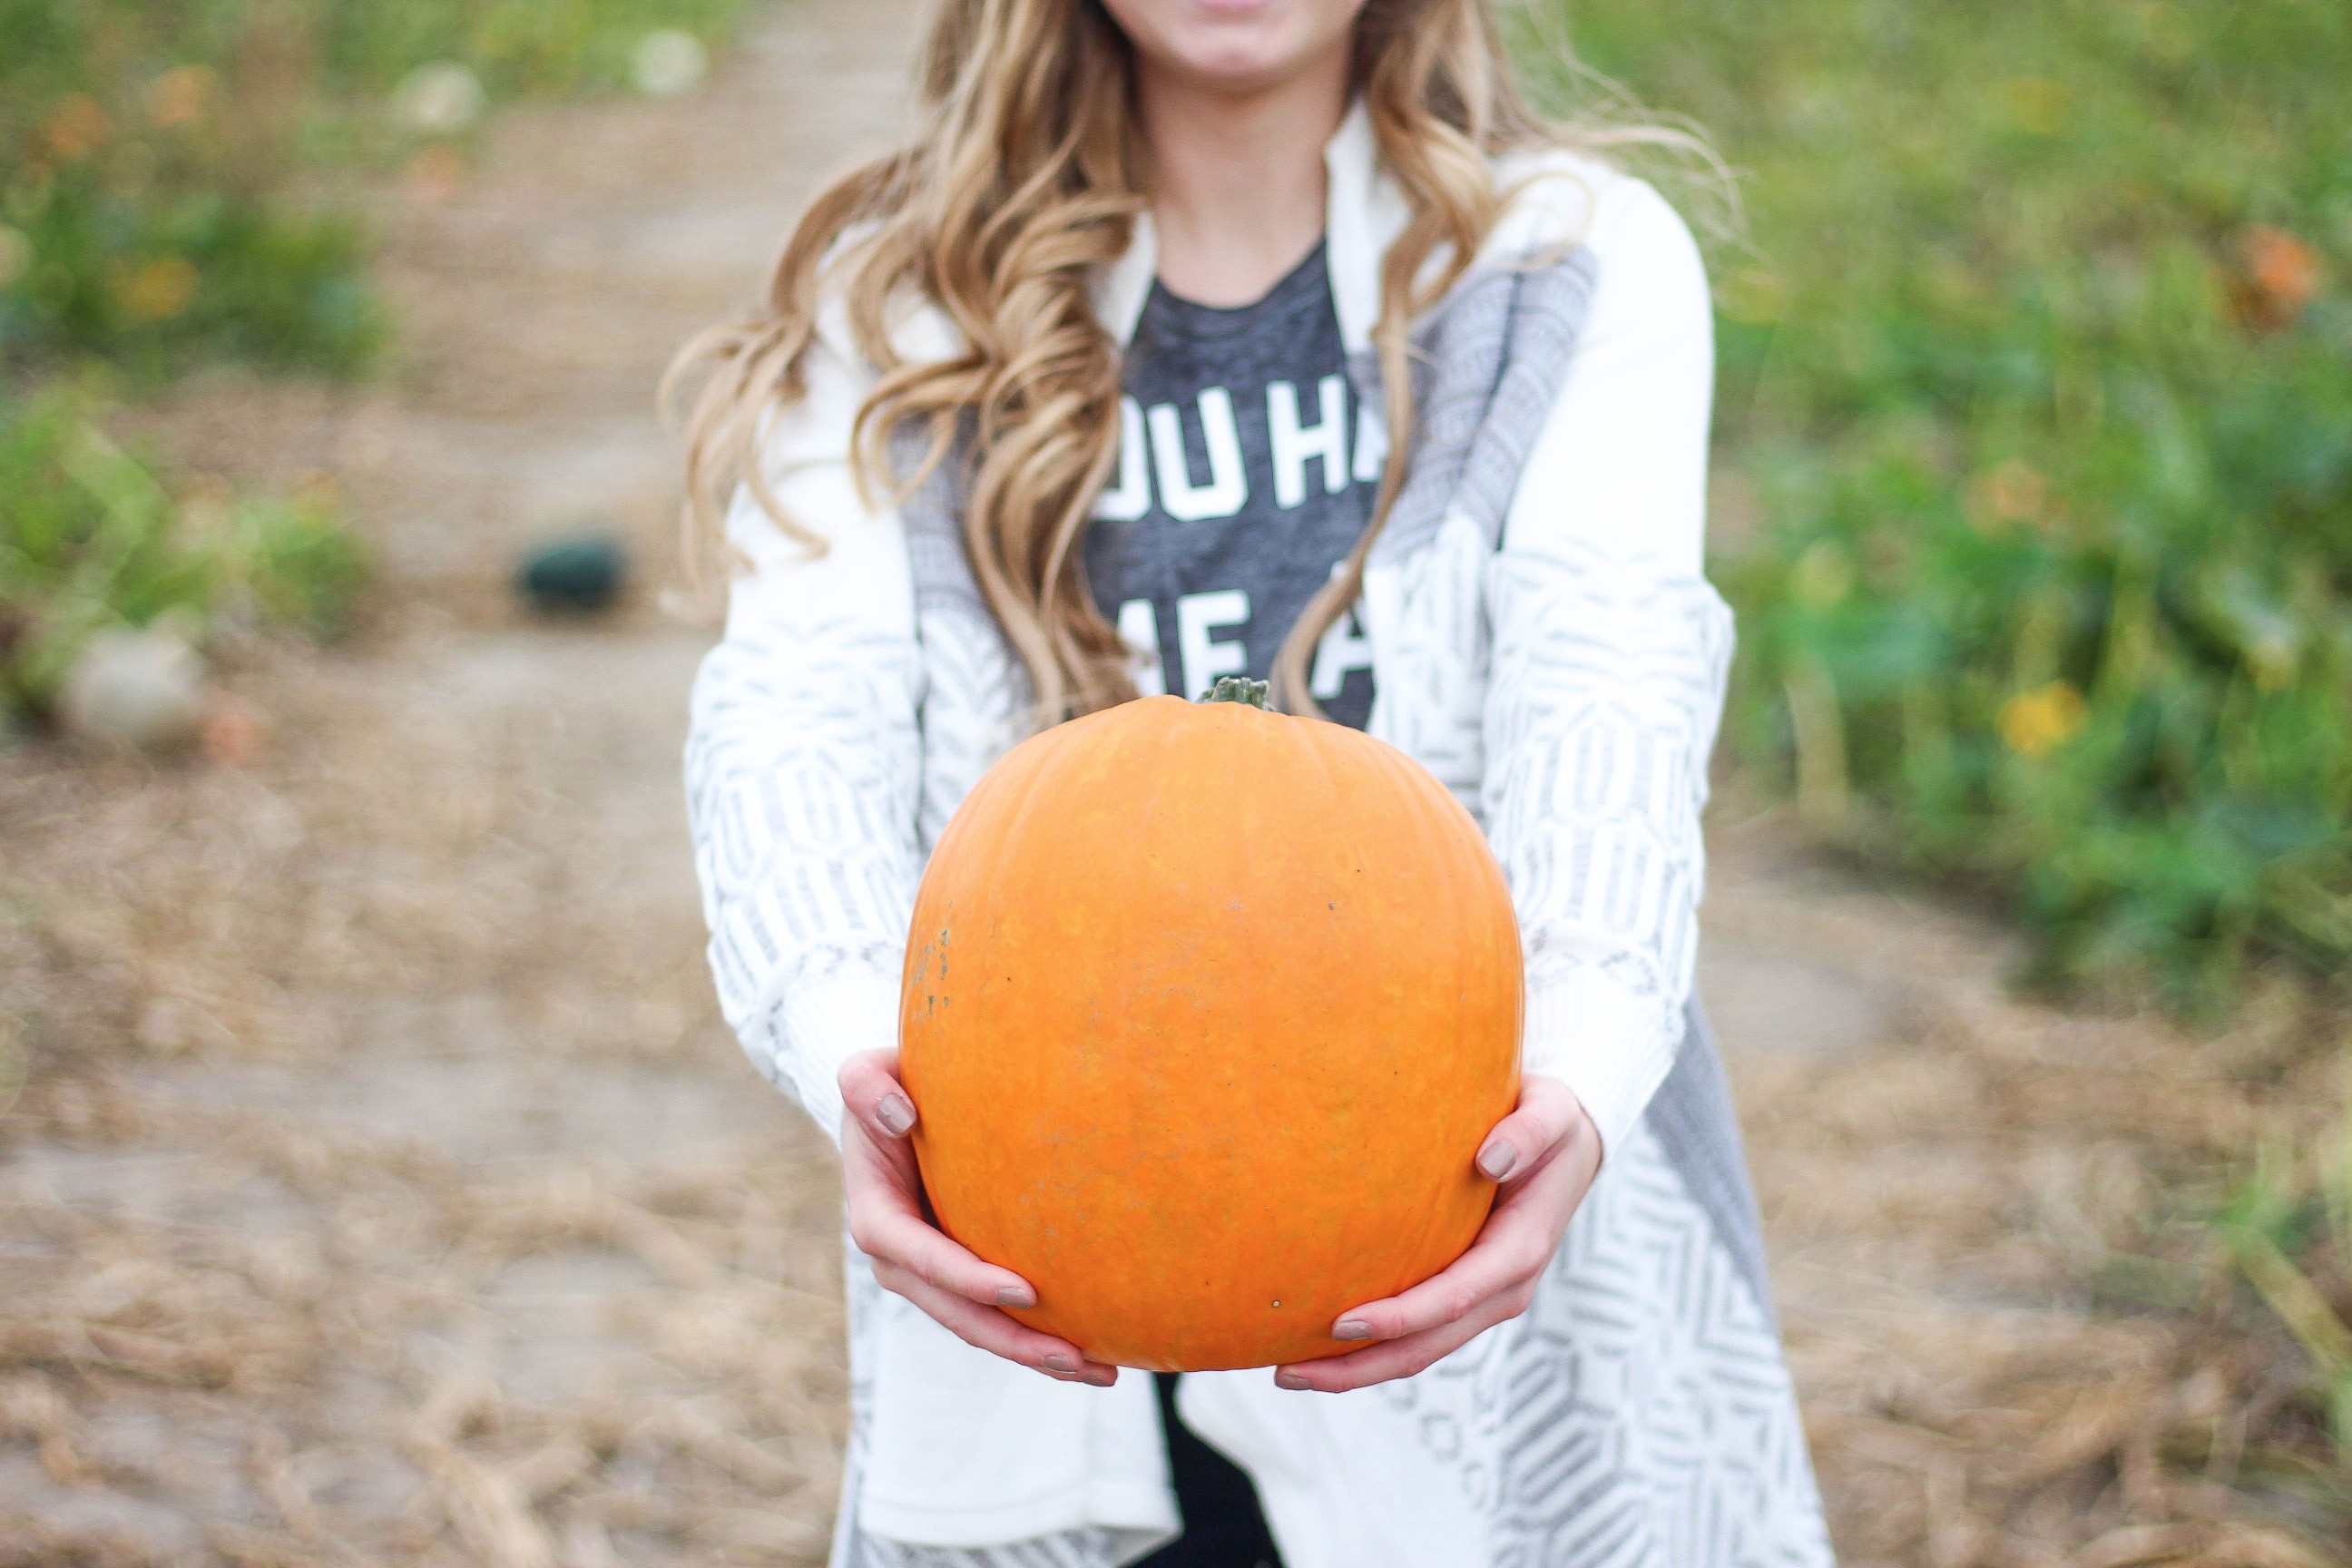 Fall pumpkin patch outfit LL bean boots southern tide by Lauren Lindmark on Daily Dose of Charm dailydoseofcharm.com